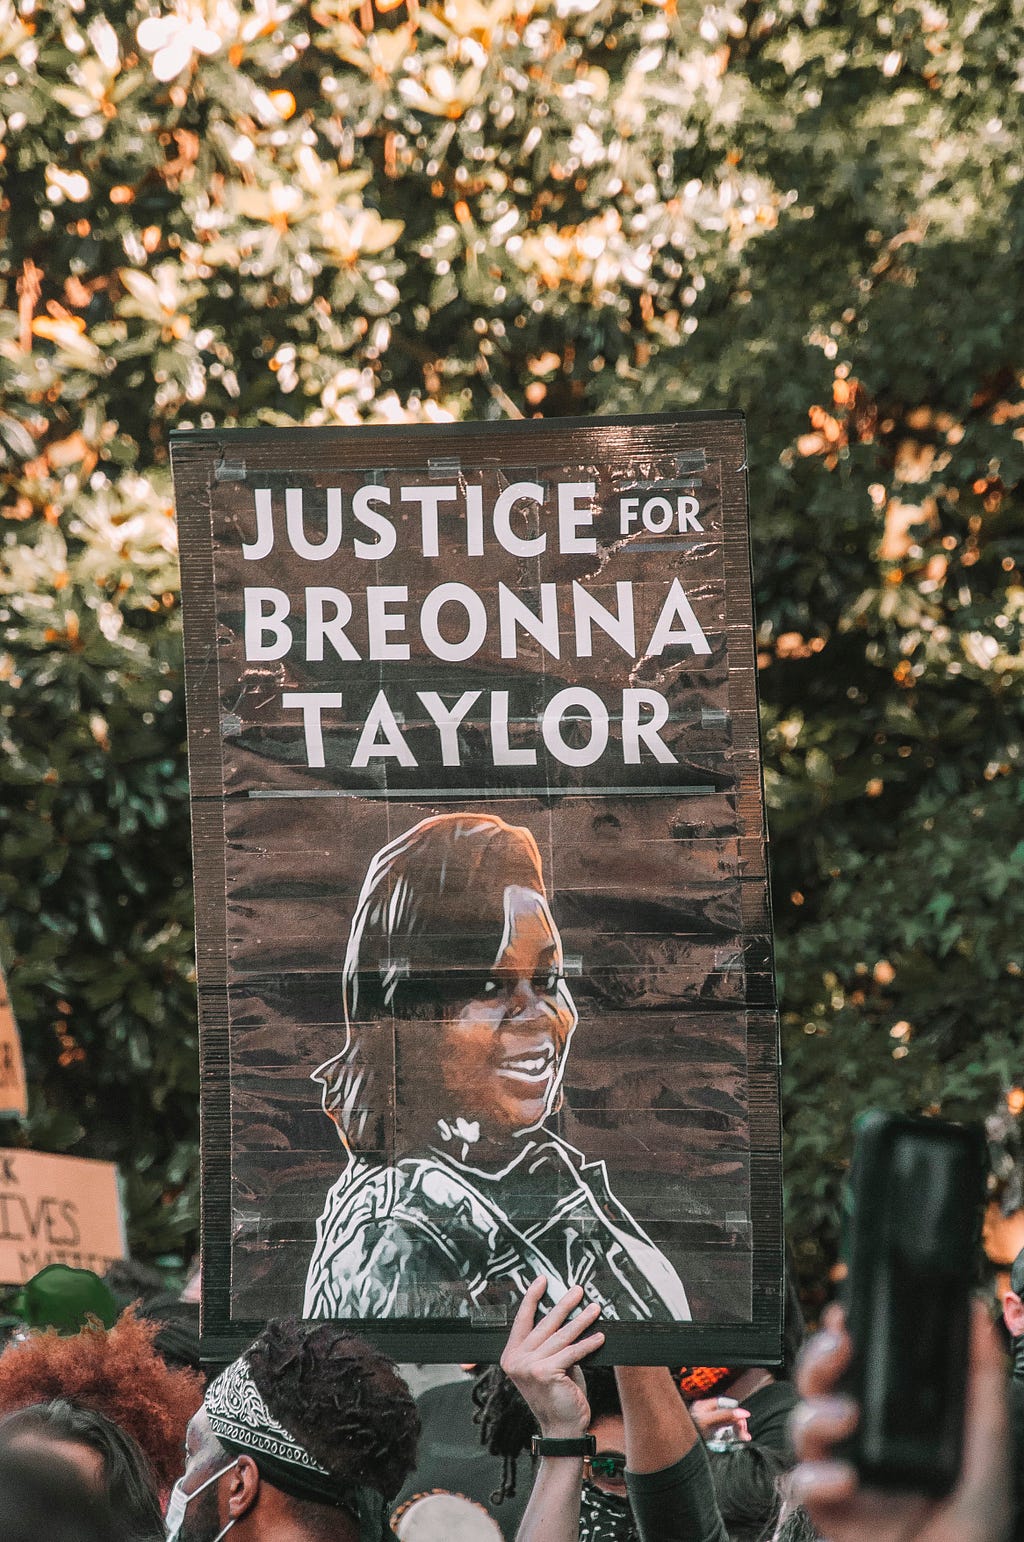 Image of a “Justice for Breonna Taylor” sign at a Black Lives Matter protest in Atlanta